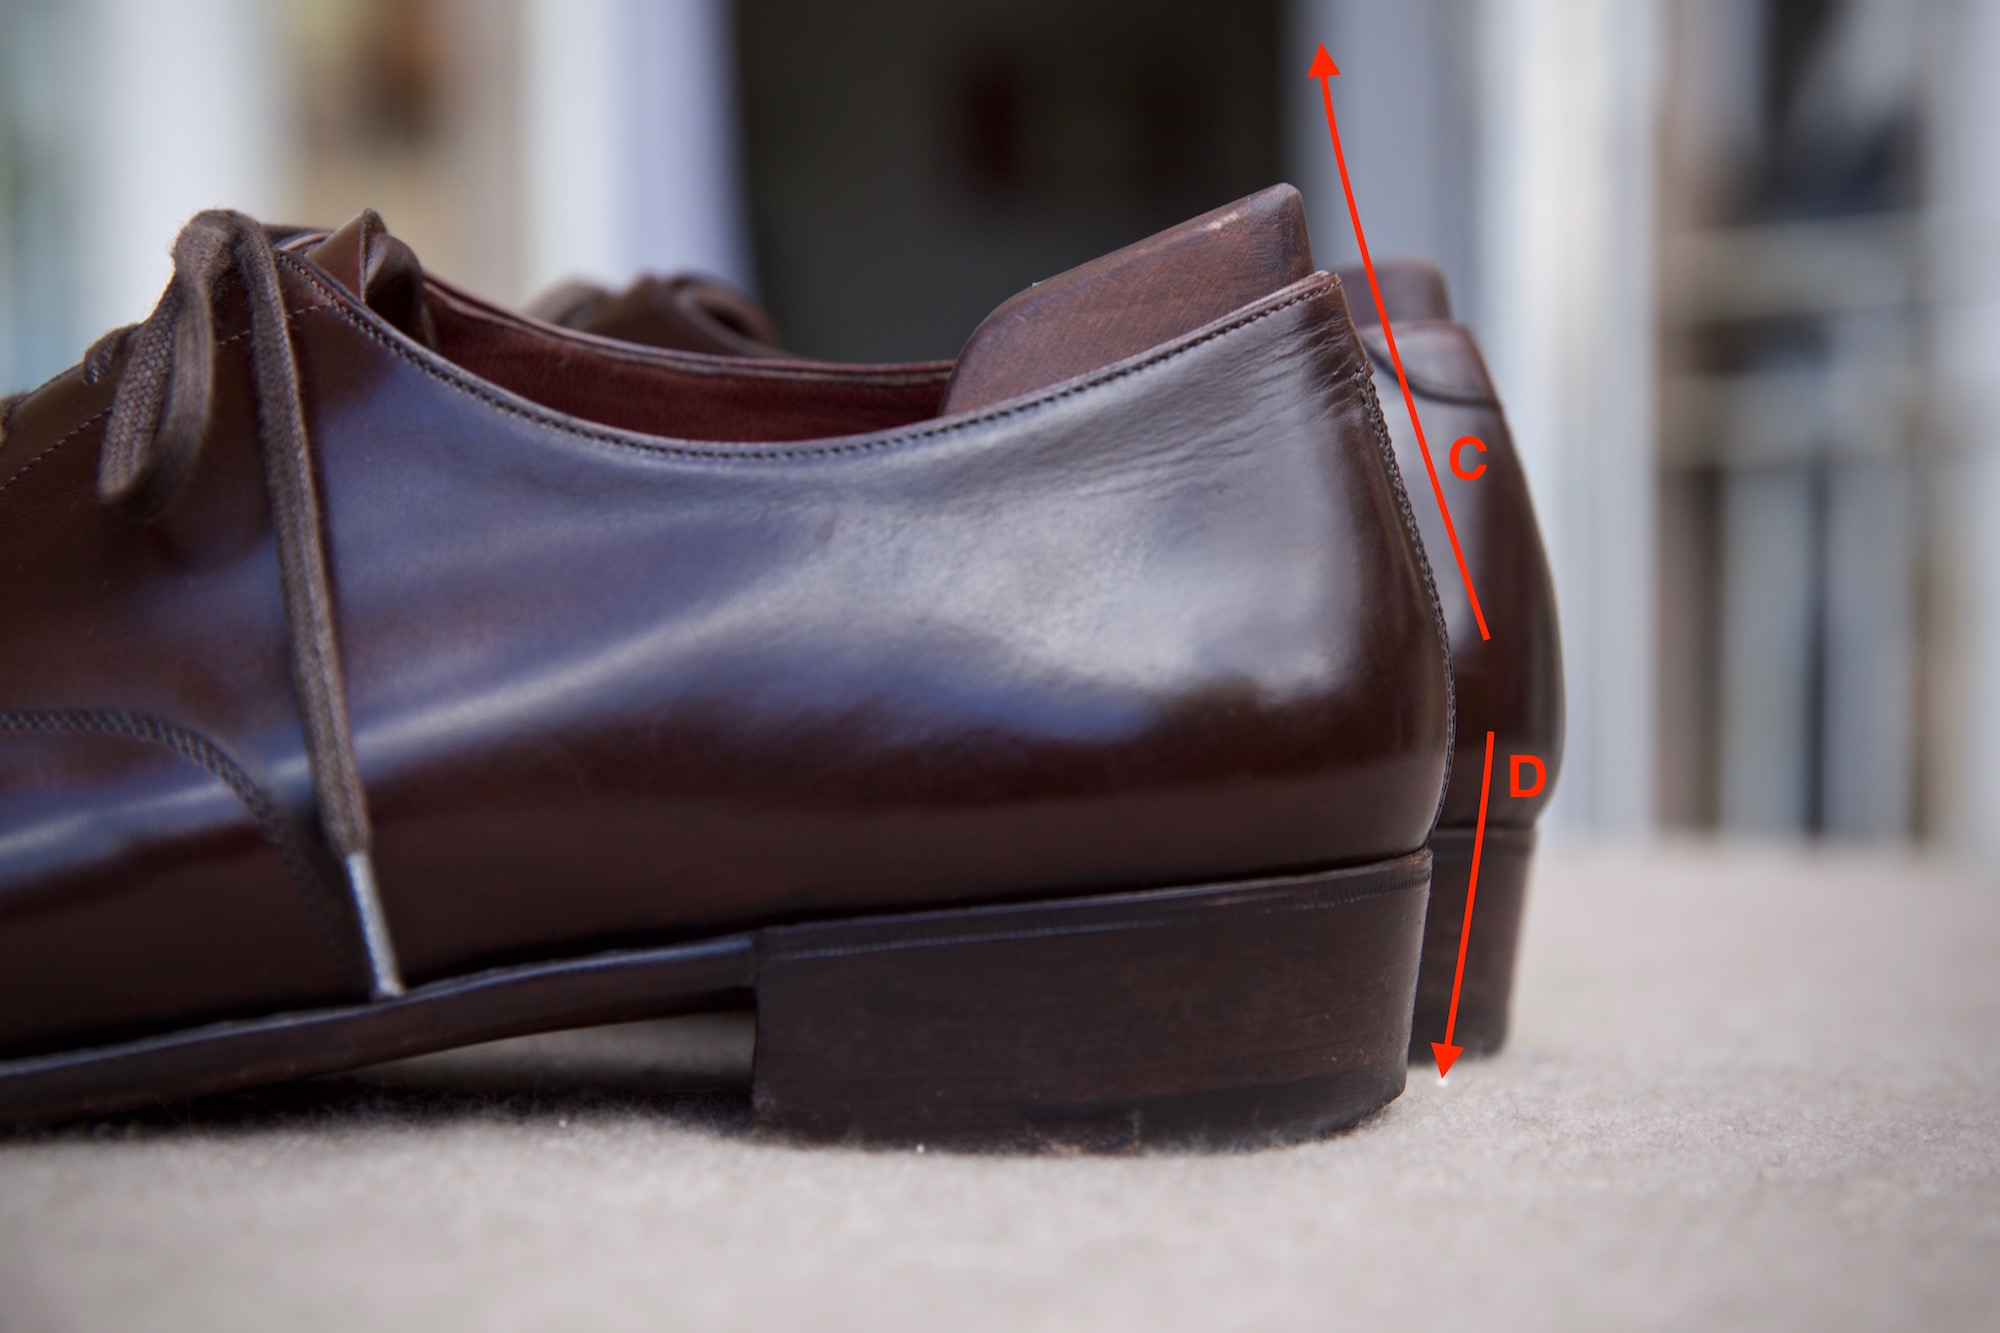 Foster \u0026 Son bespoke shoes: Review 